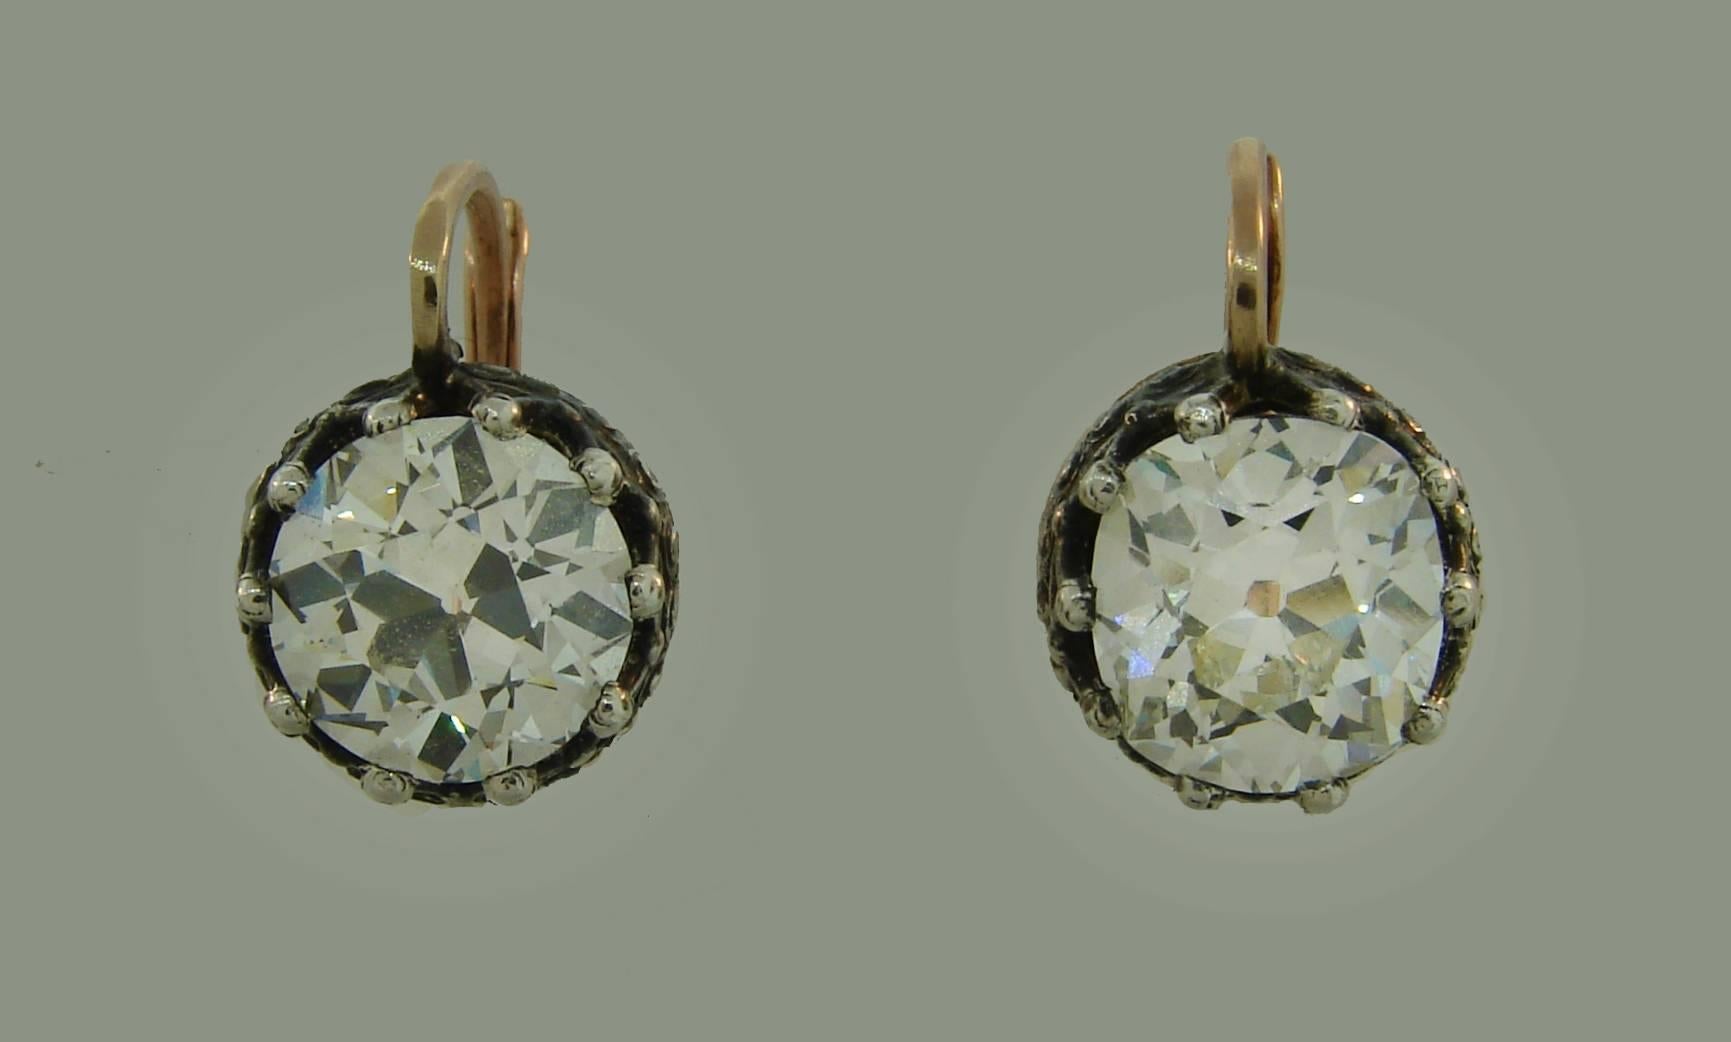 Fabulous Victorian drop stud earrings. Classy, timeless, feminine and wearable, they are a great addition to your jewelry collection. 
Feature two Old European cut diamonds set in yellow gold topped with silver. The diamonds are 2.43-carat and